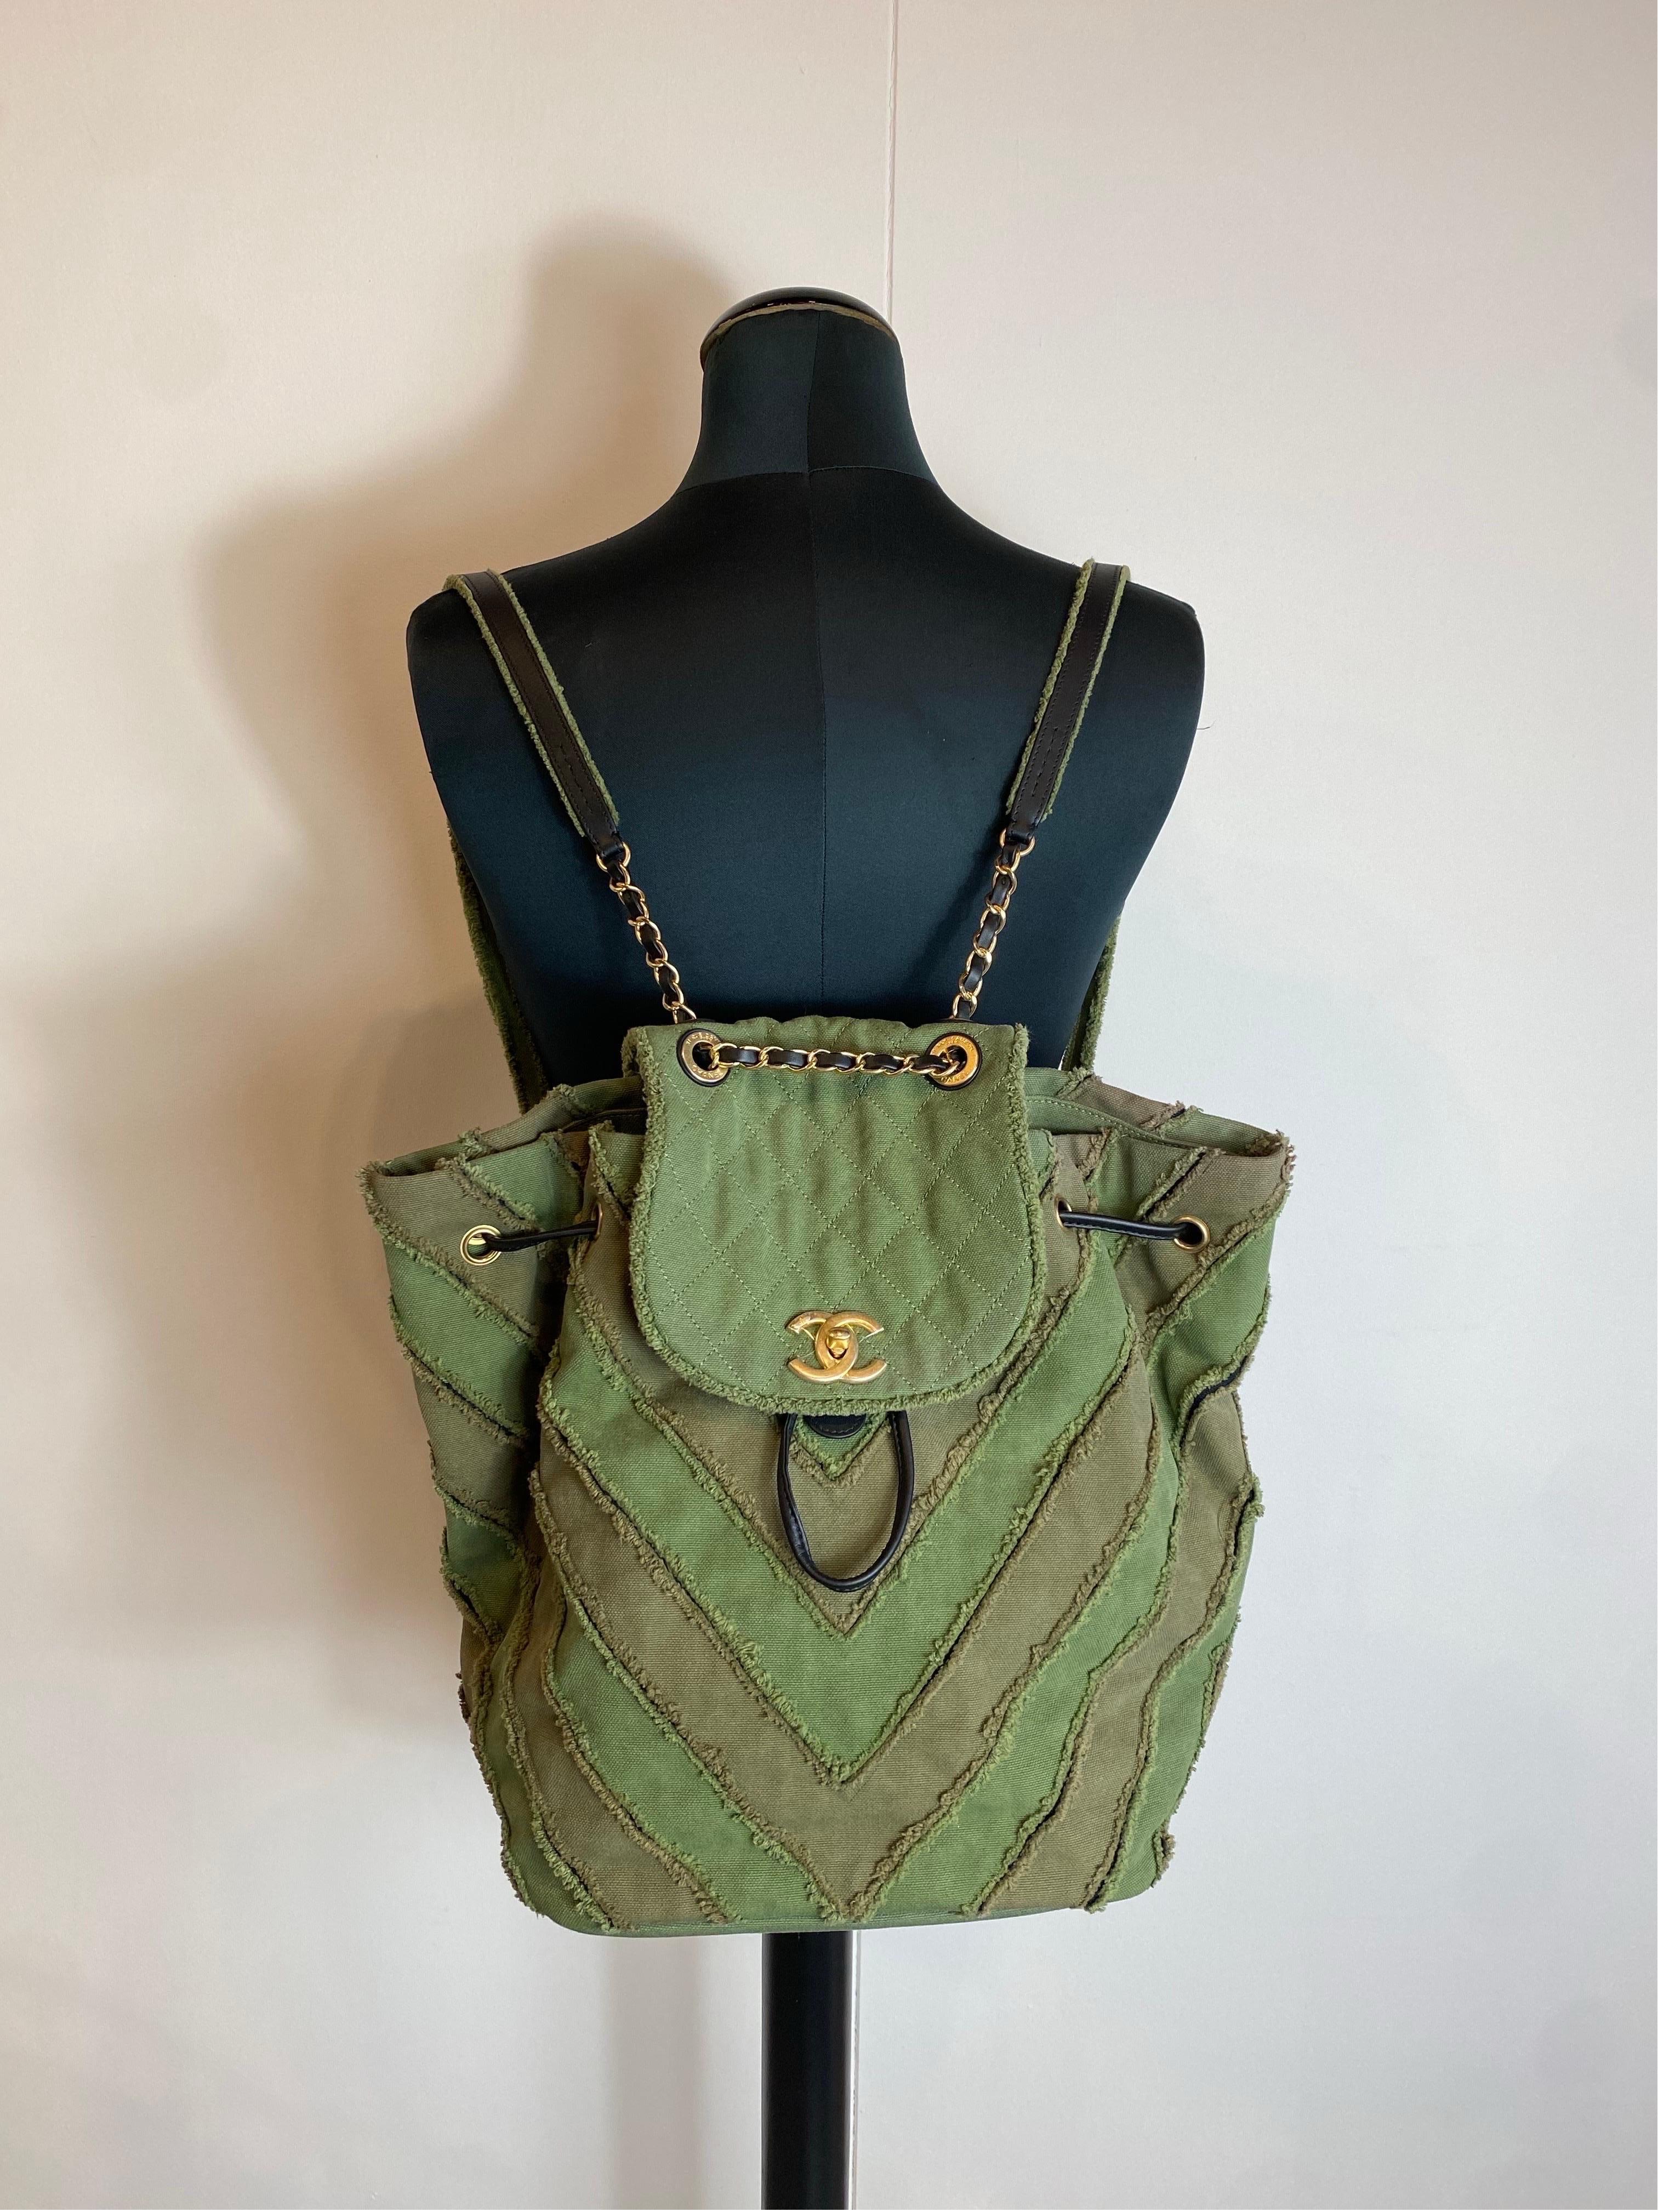 Chanel backpack.
Cruise 2017 collection.
In military green canvas and black leather details.
Coulisse closure.
Inside there is a pocket closed by a zip.
34cm tall
30cm wide
13 cm deep
Like new, never used.
Still has CC hardware plastic